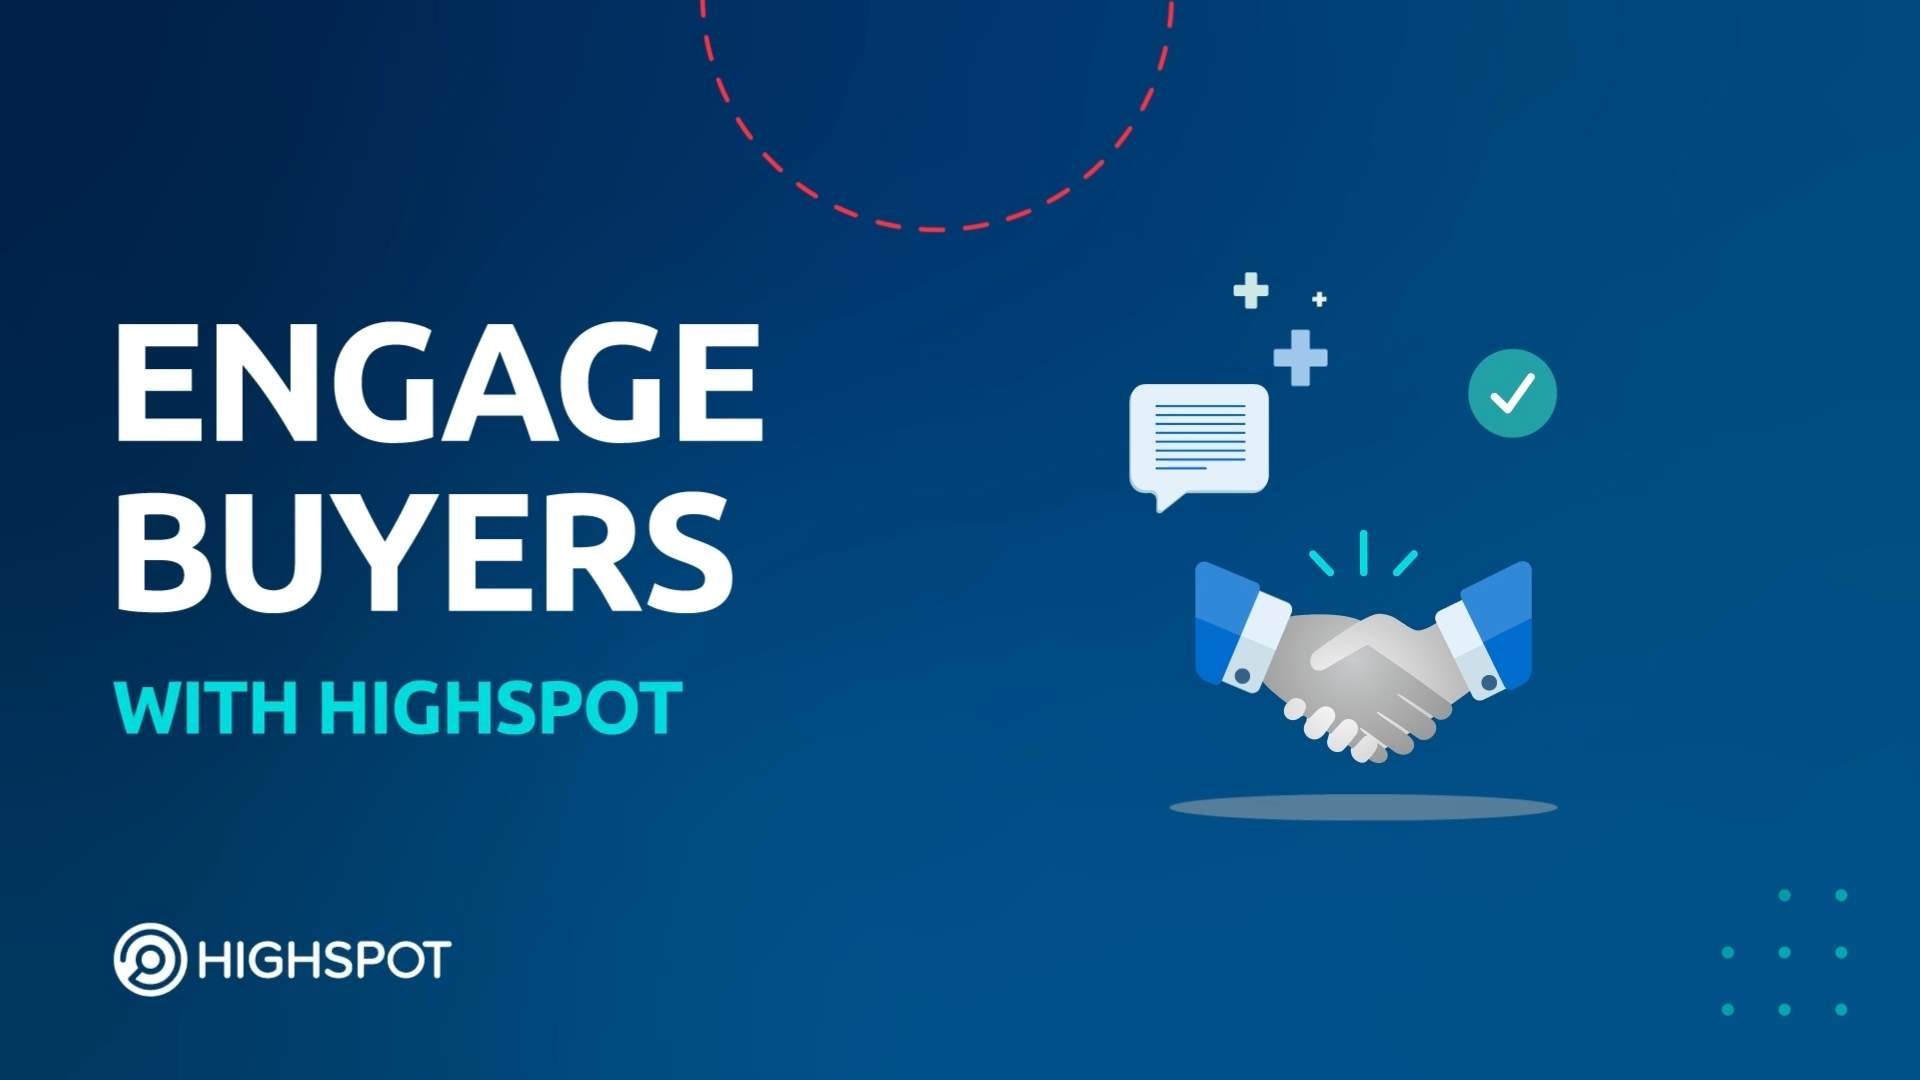 Highspot in Action: Engage Buyers